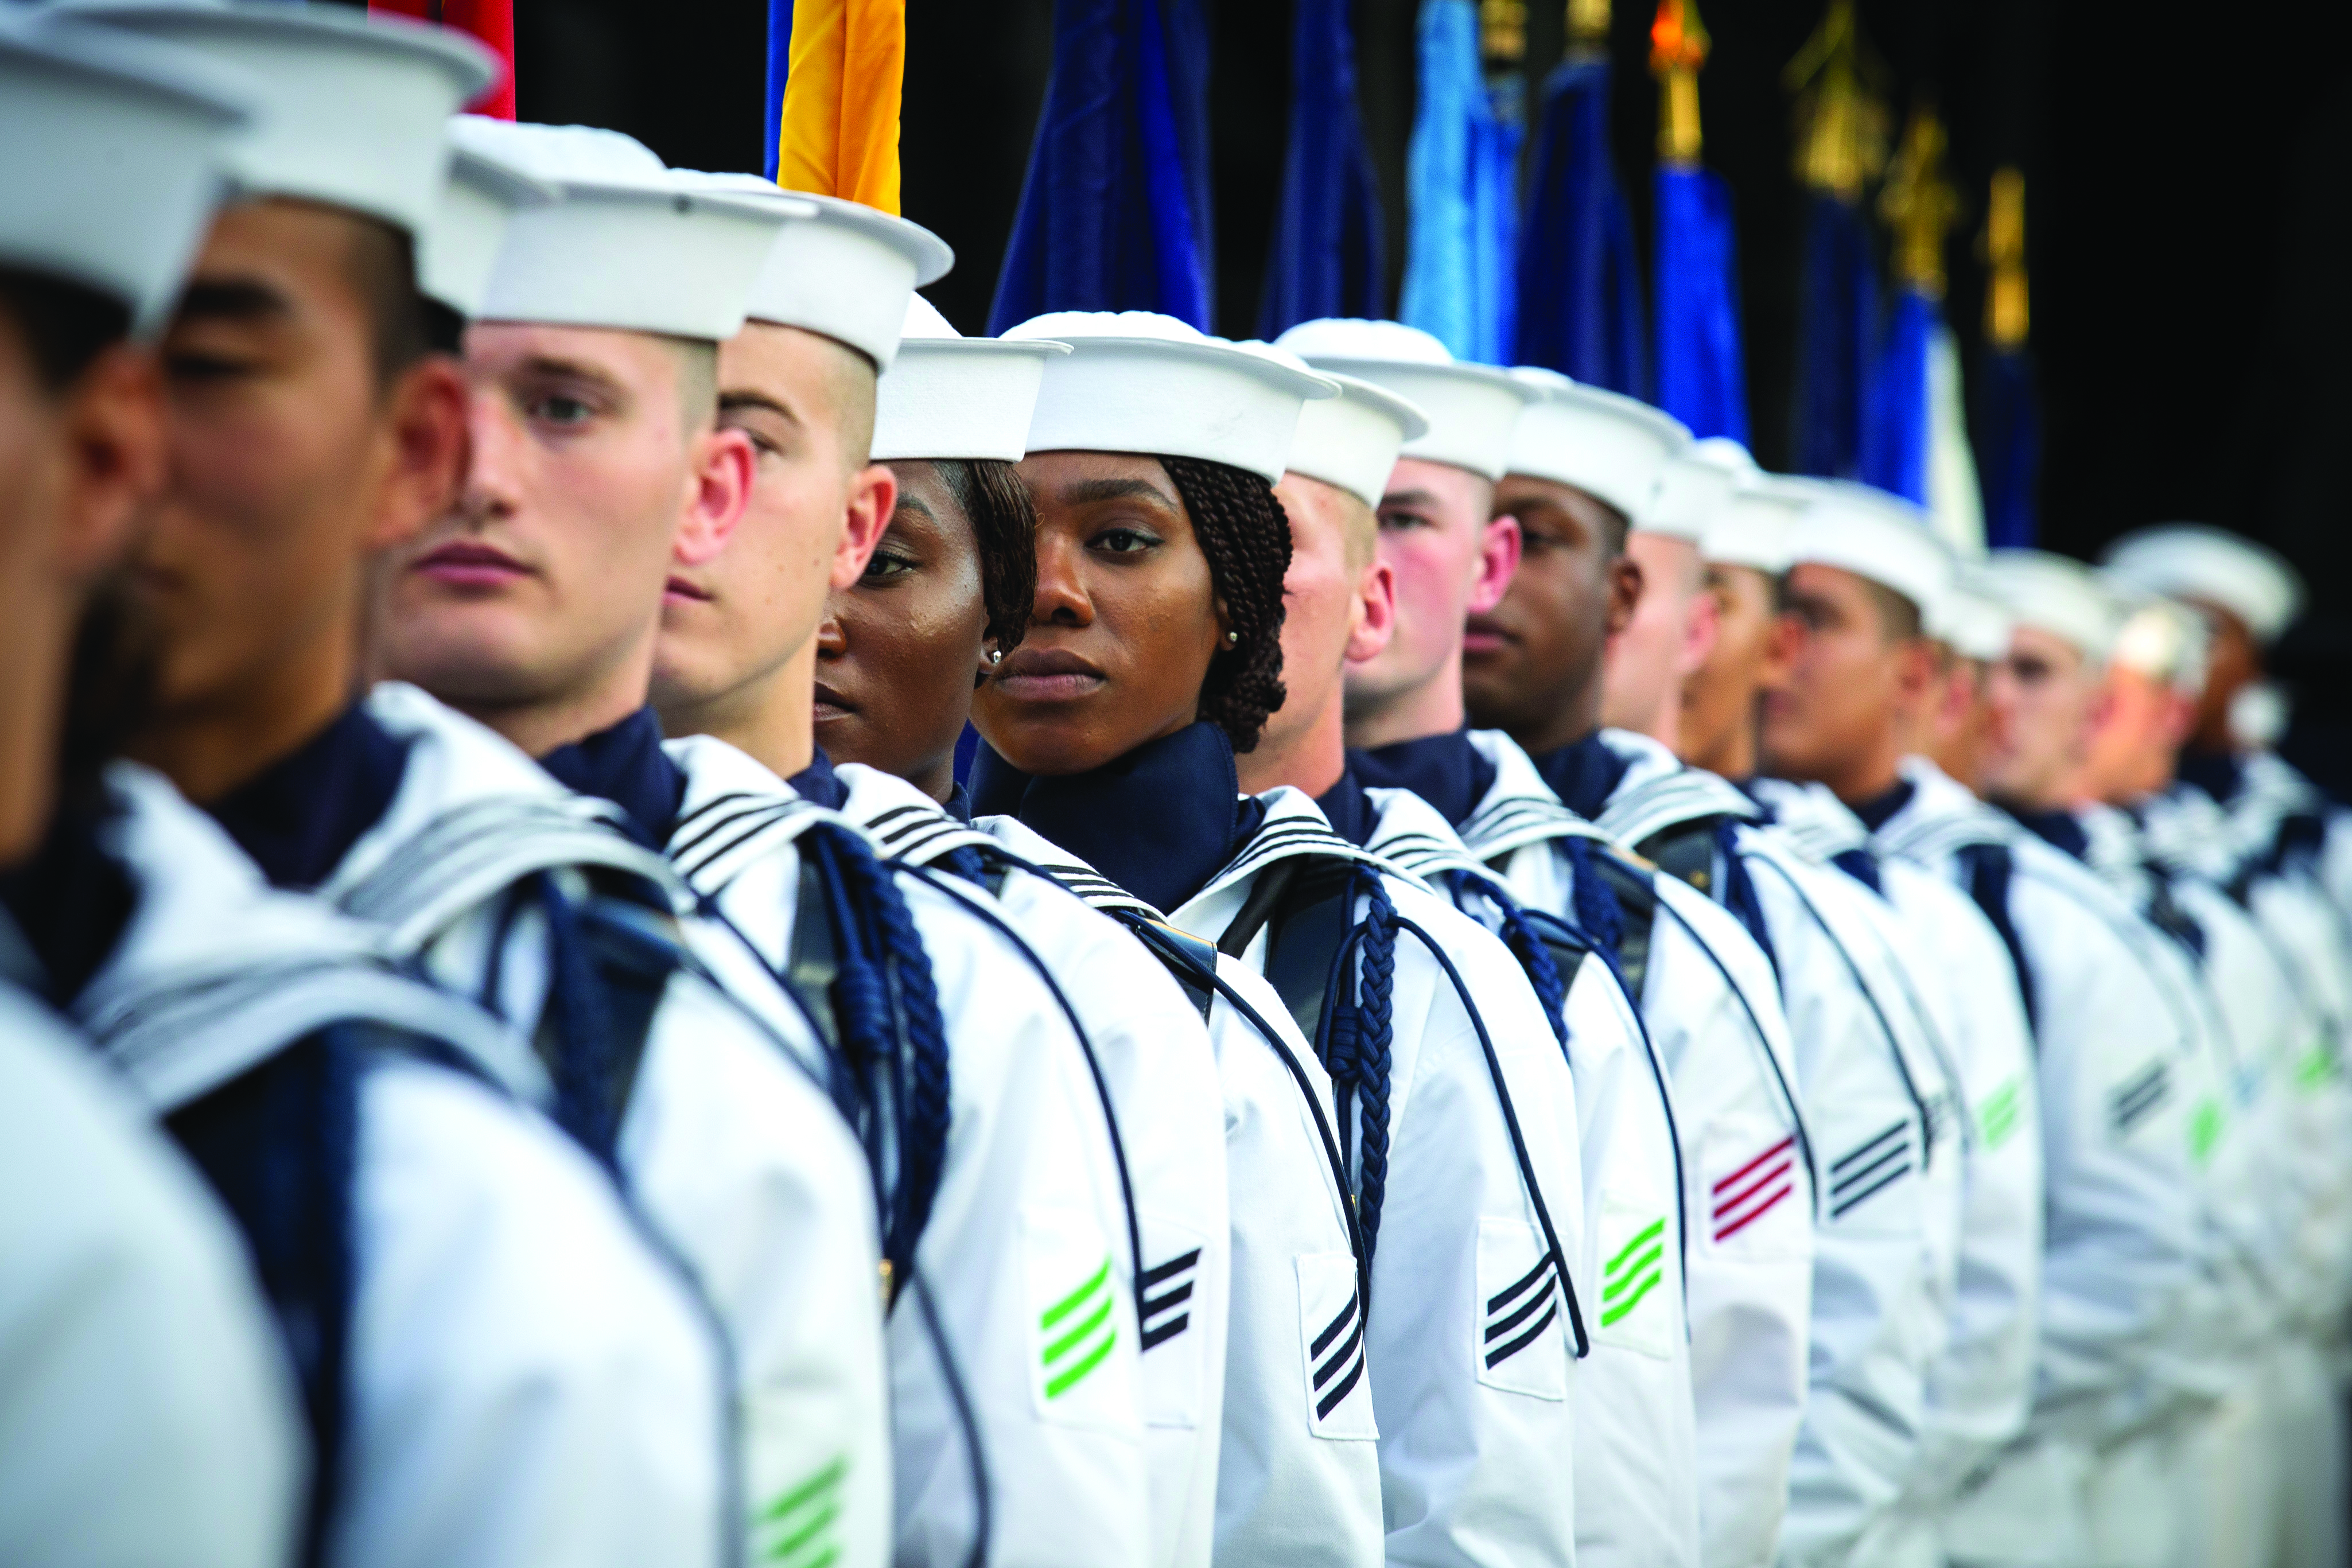 Source: U.S. Navy, Sailors in the U.S. Navy Ceremonial Guard wait to parade the colors in Washington, DC.